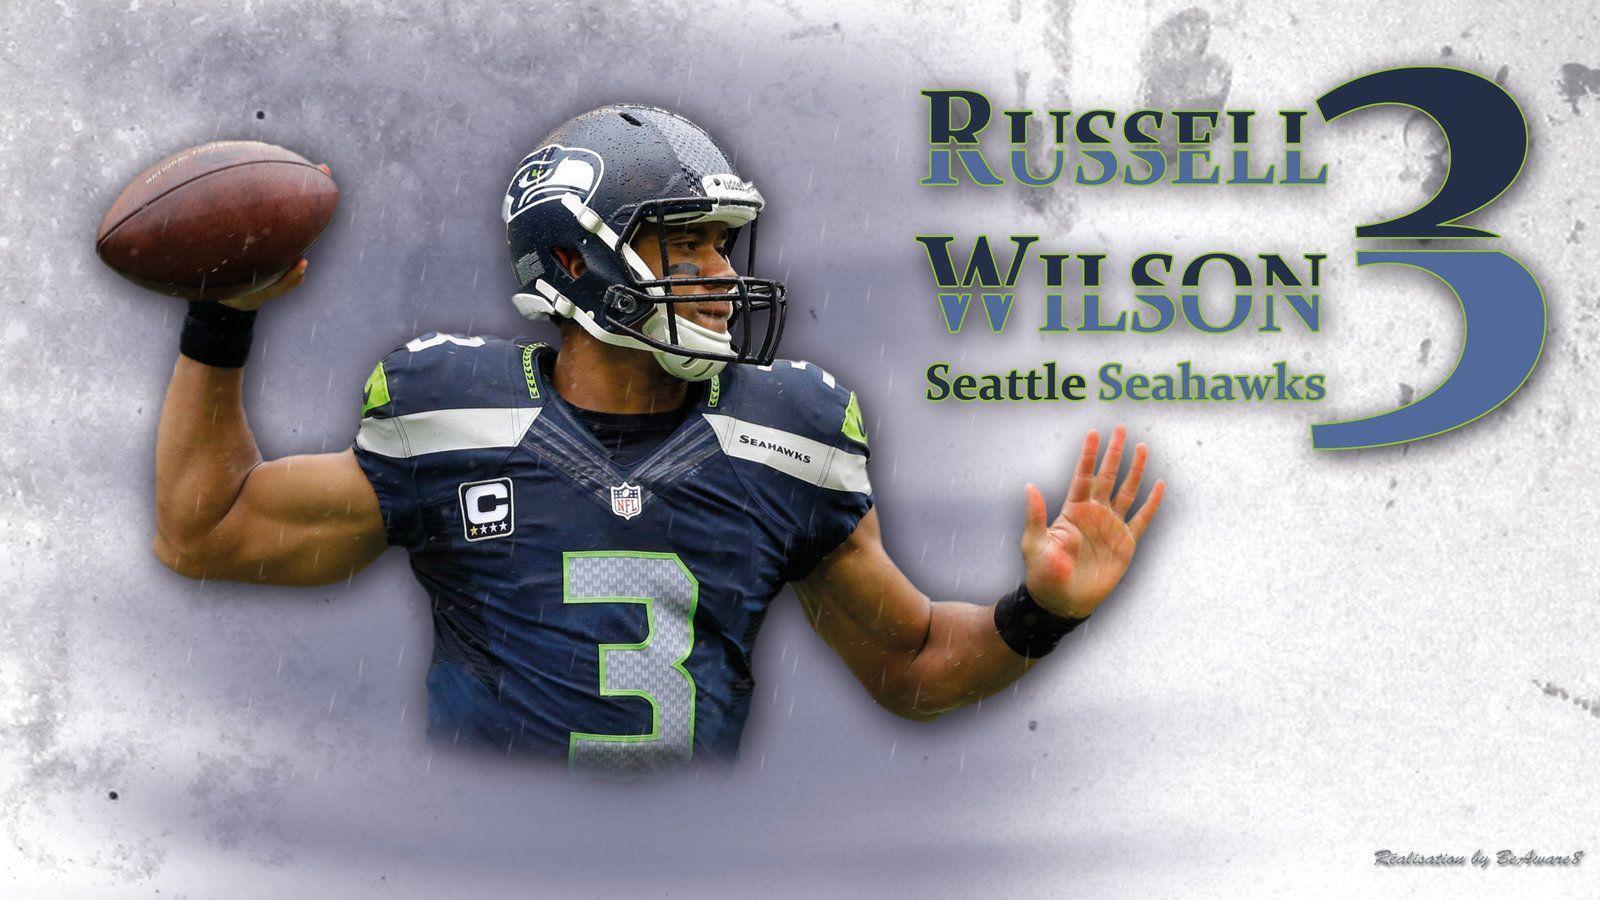 Russell Wilson by BeAware